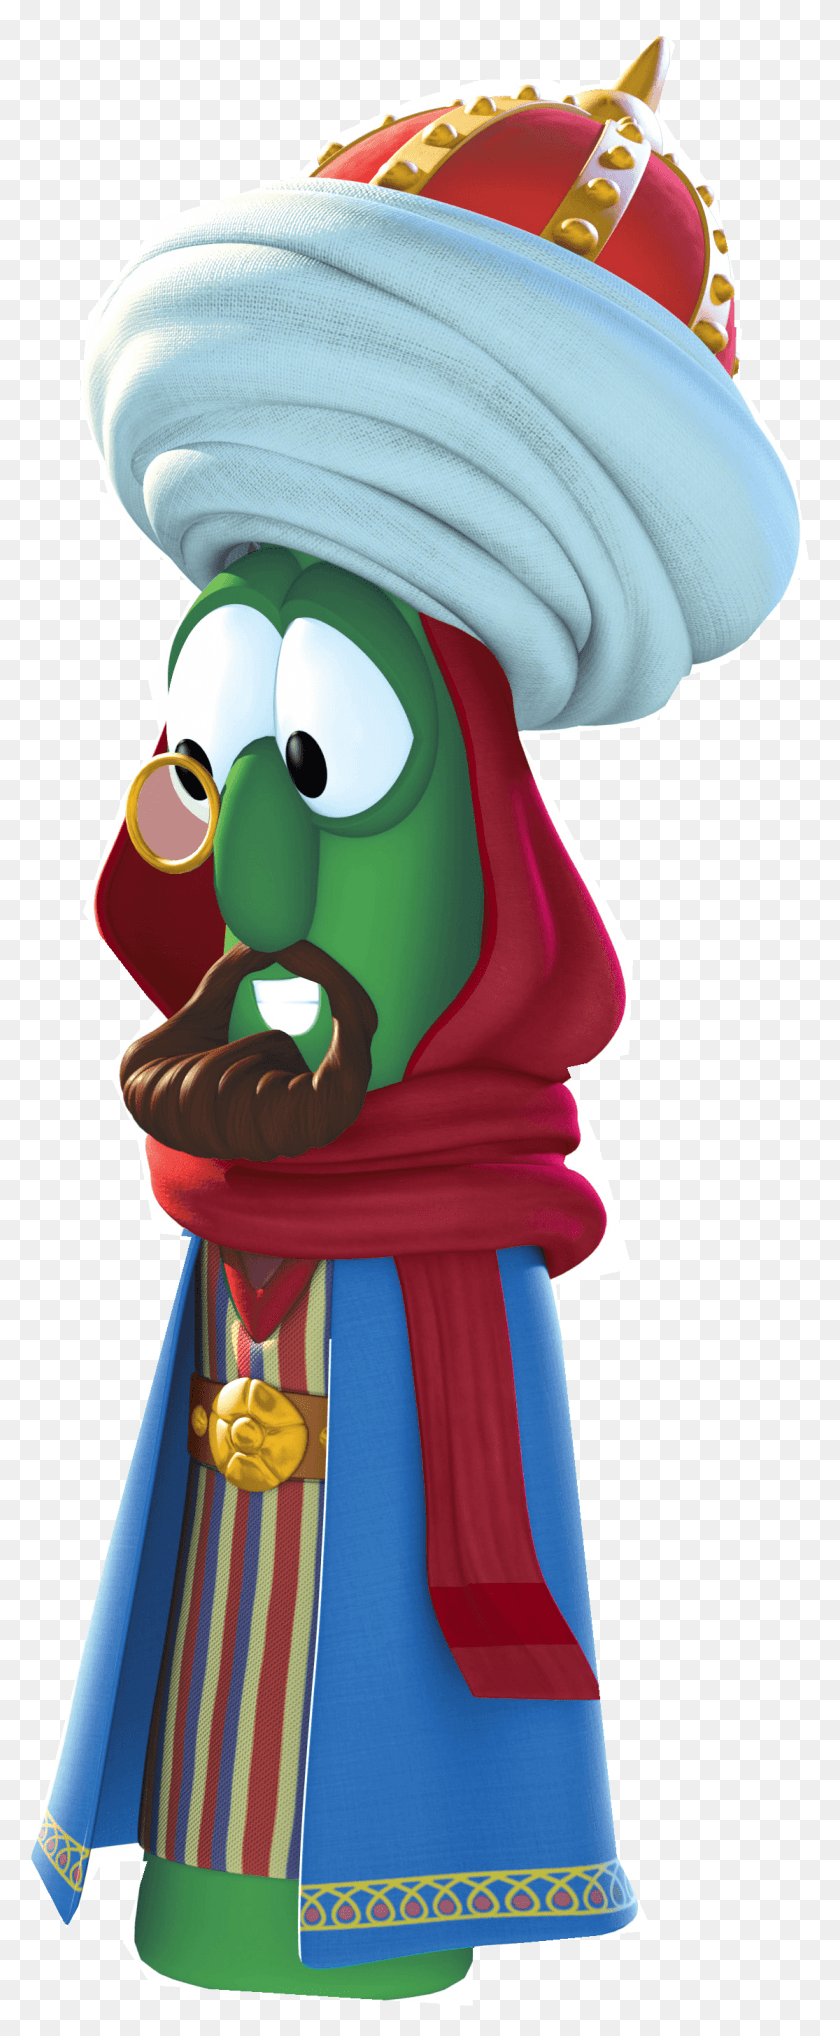 1115x2826 Veggietales The Little Drummer Boy Logotipos, Ropa, Ropa, Angry Birds Hd Png